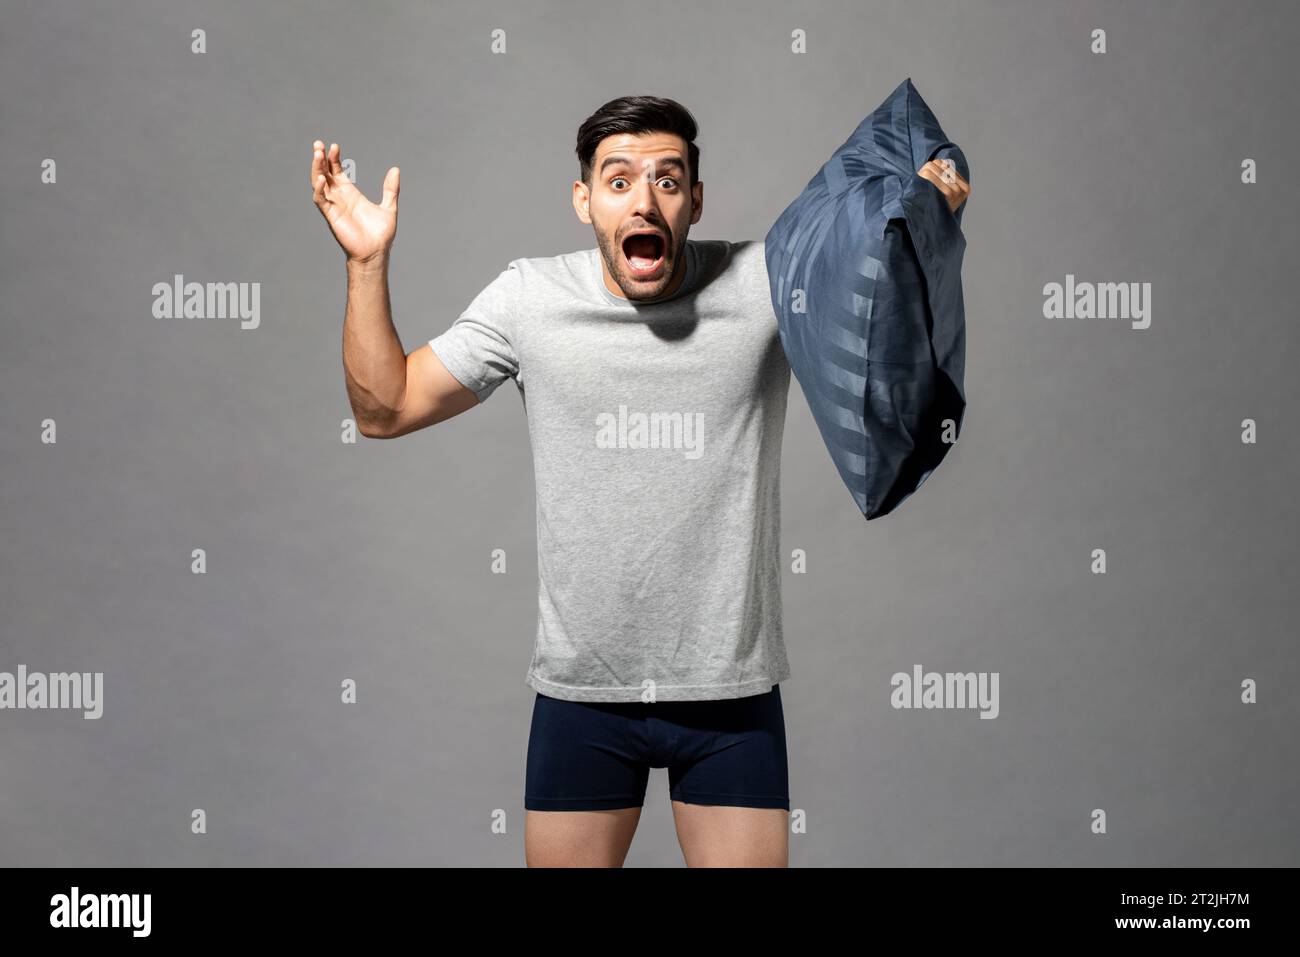 Astonished Caucasian man in nightwear with pillow in hand screaming with raised arms on gray background Stock Photo